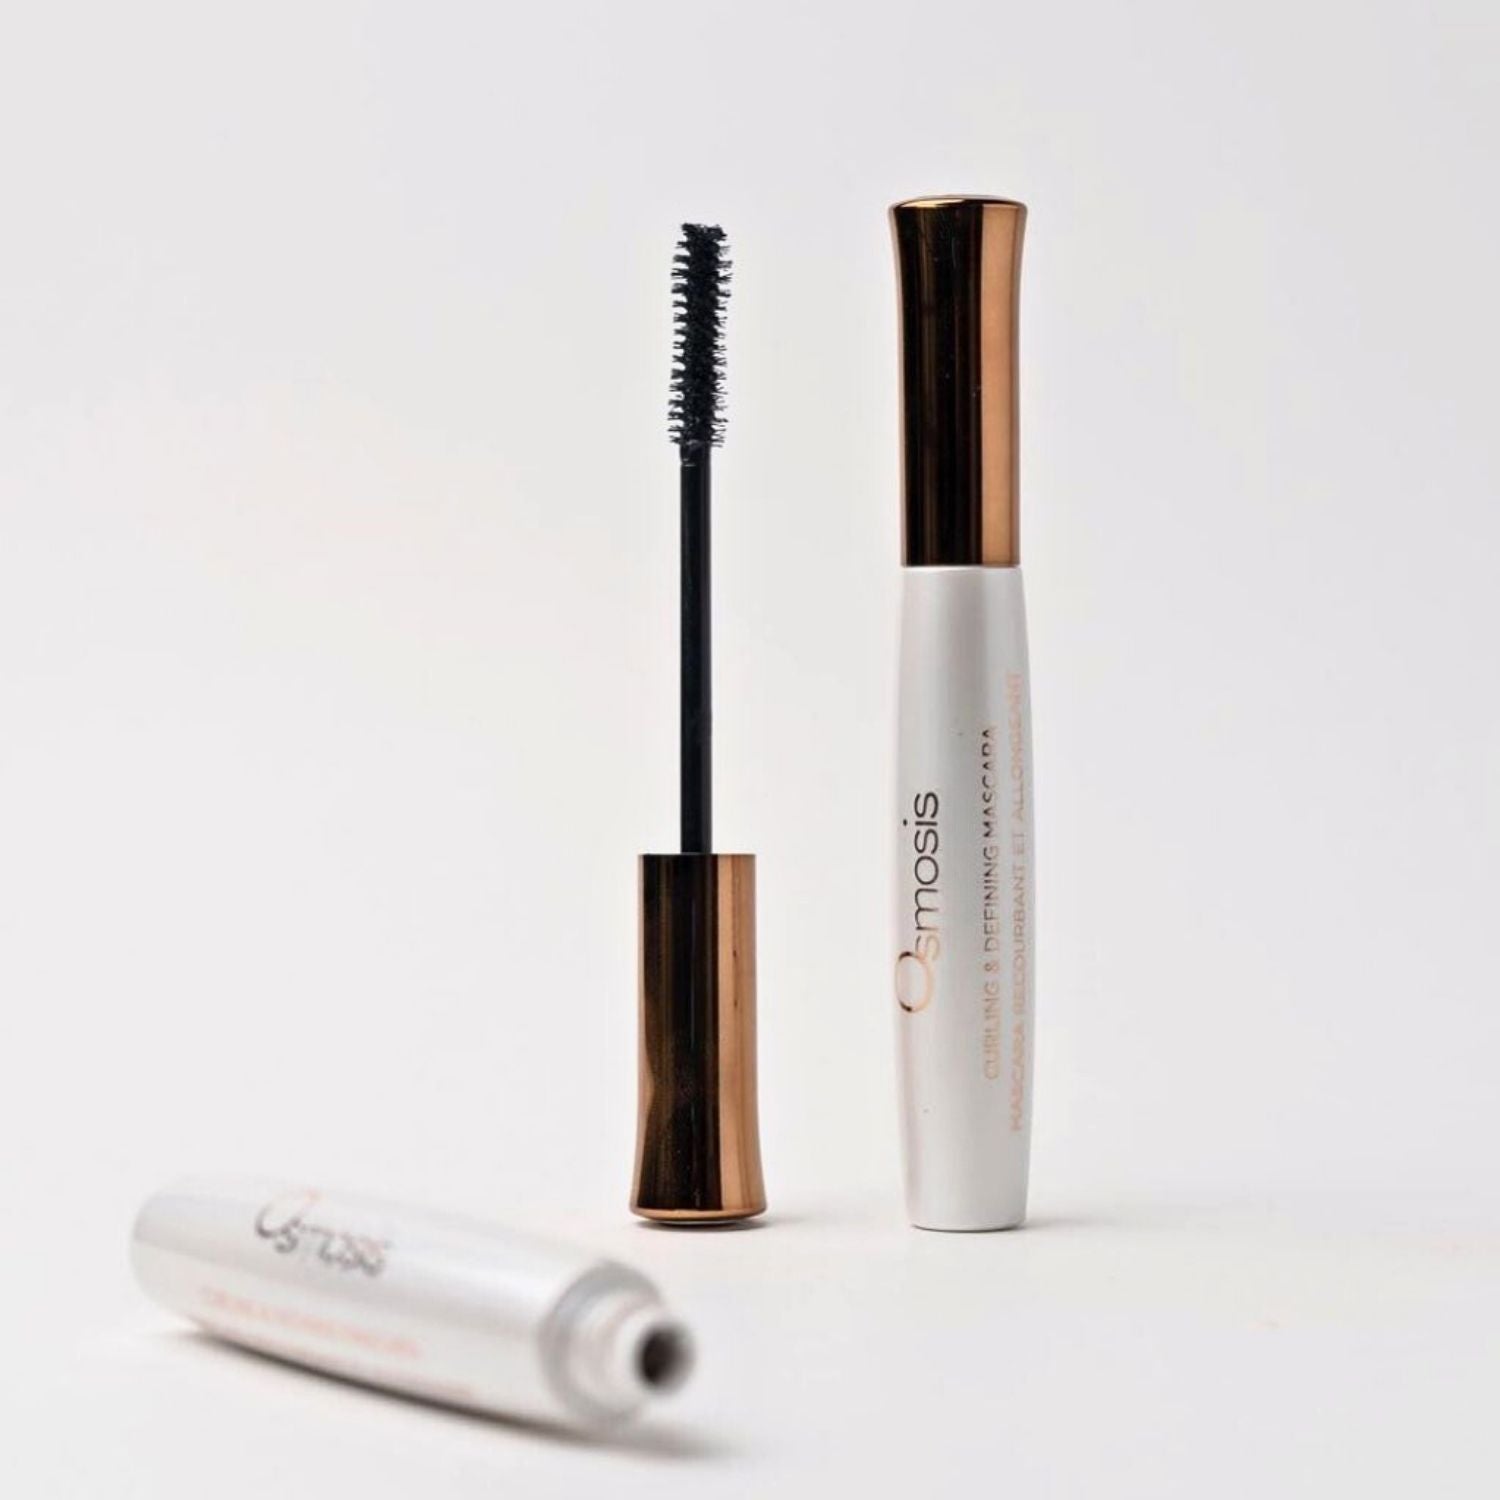 standing mascara open displayed on white background